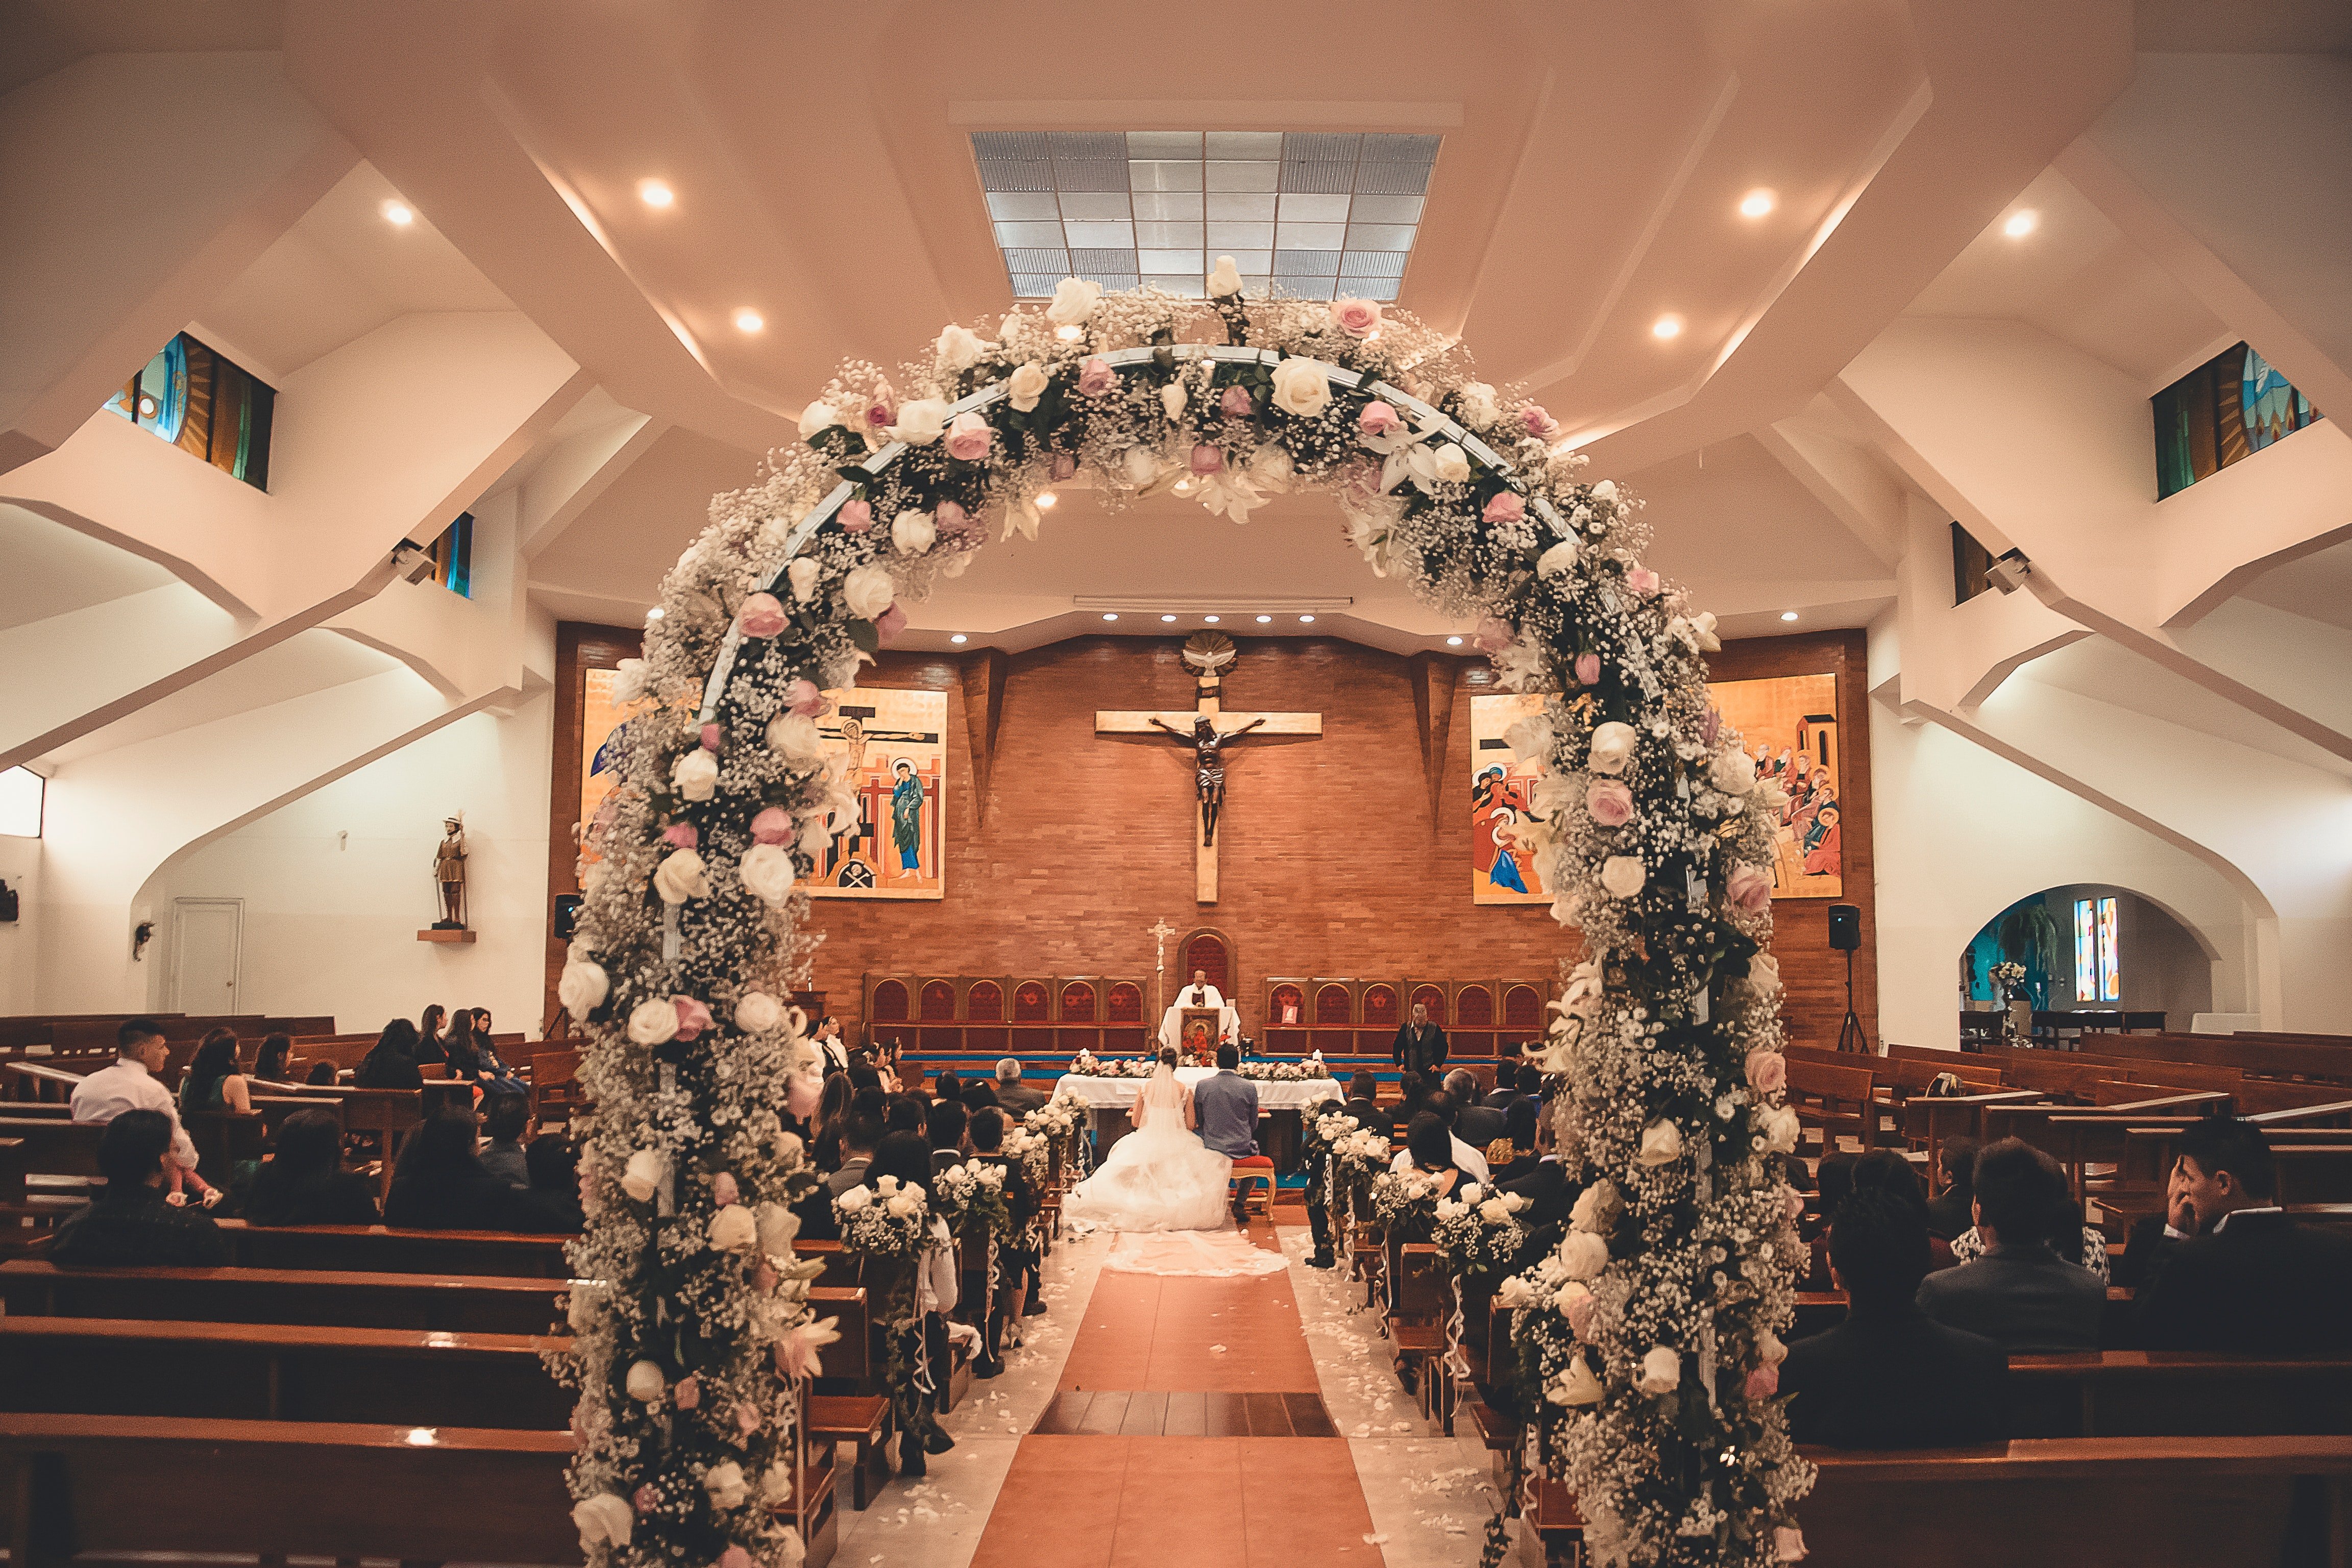 Shannon and Gilbert married at a church | Photo: Pexels